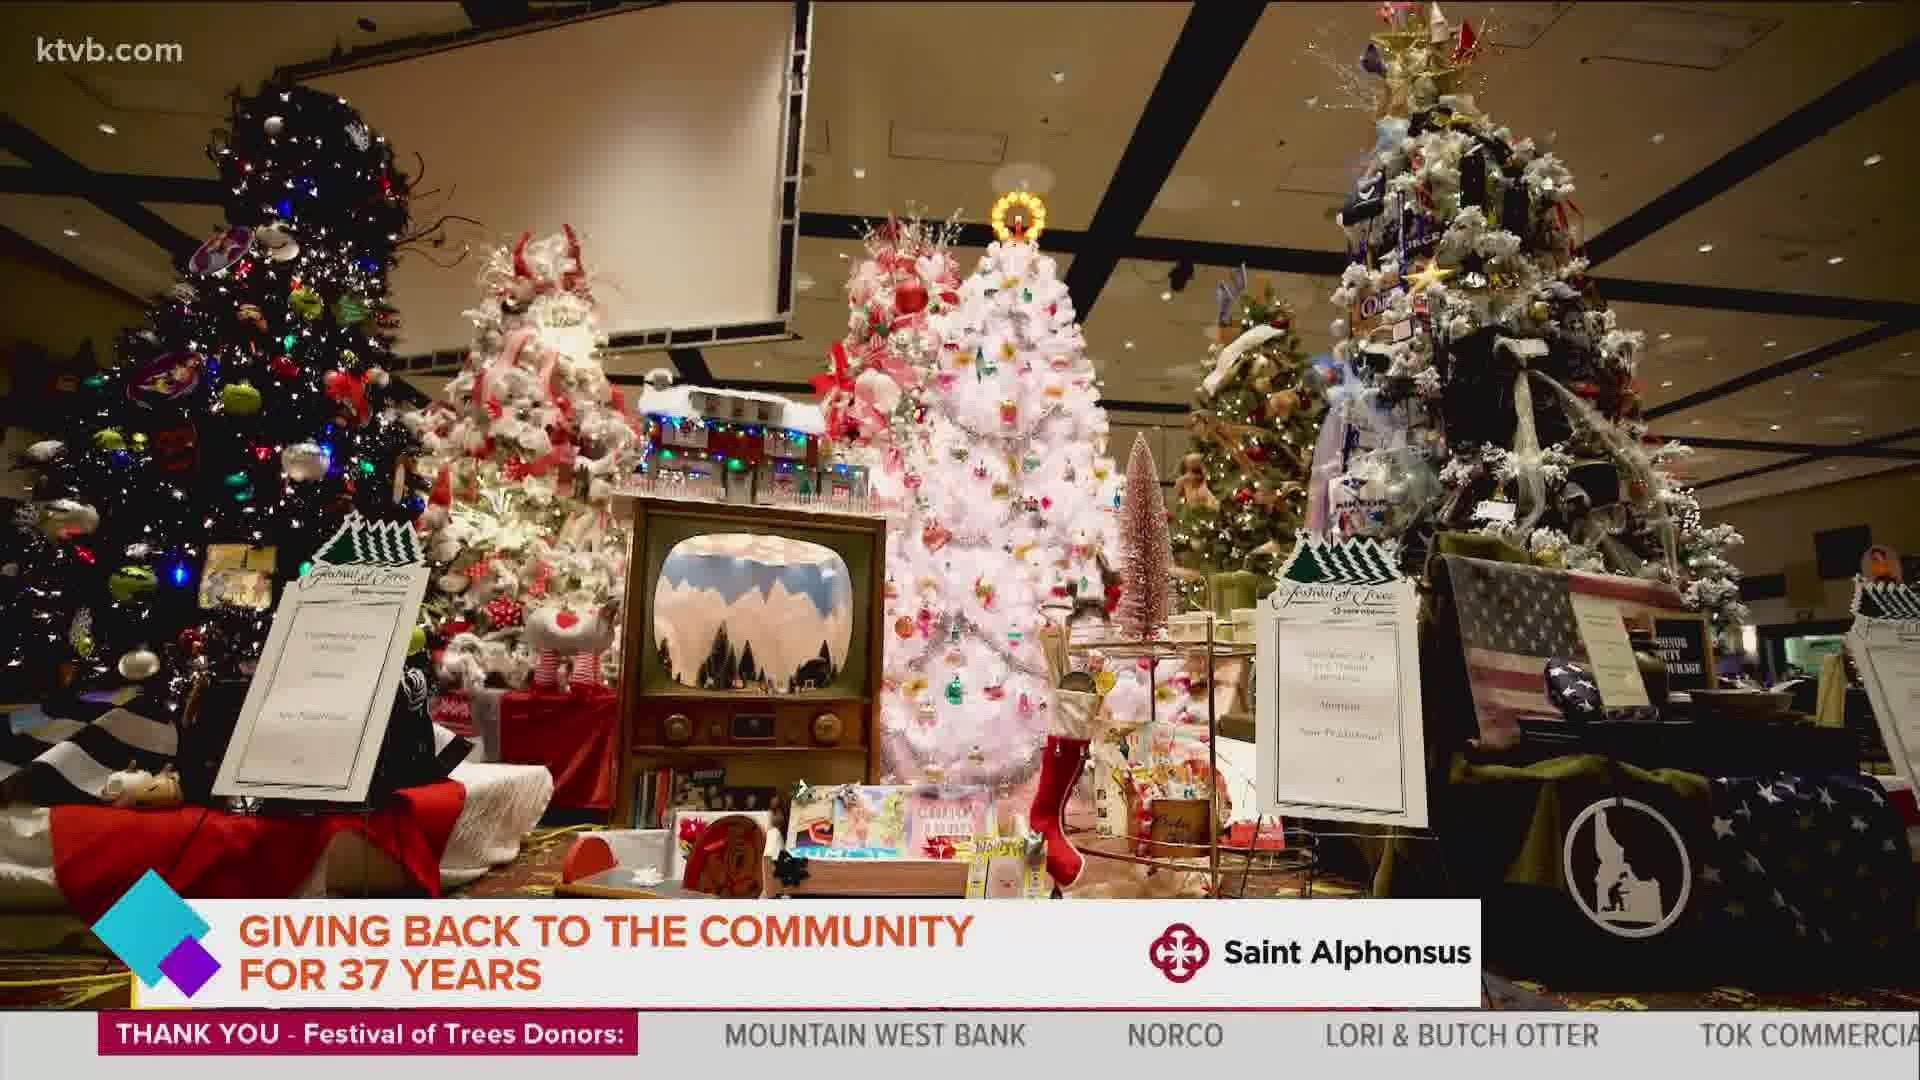 Mellisa Paul speaks with Odette Bolano with Saint Alphonsus about this year's Festival of Trees & how they give back to the community.